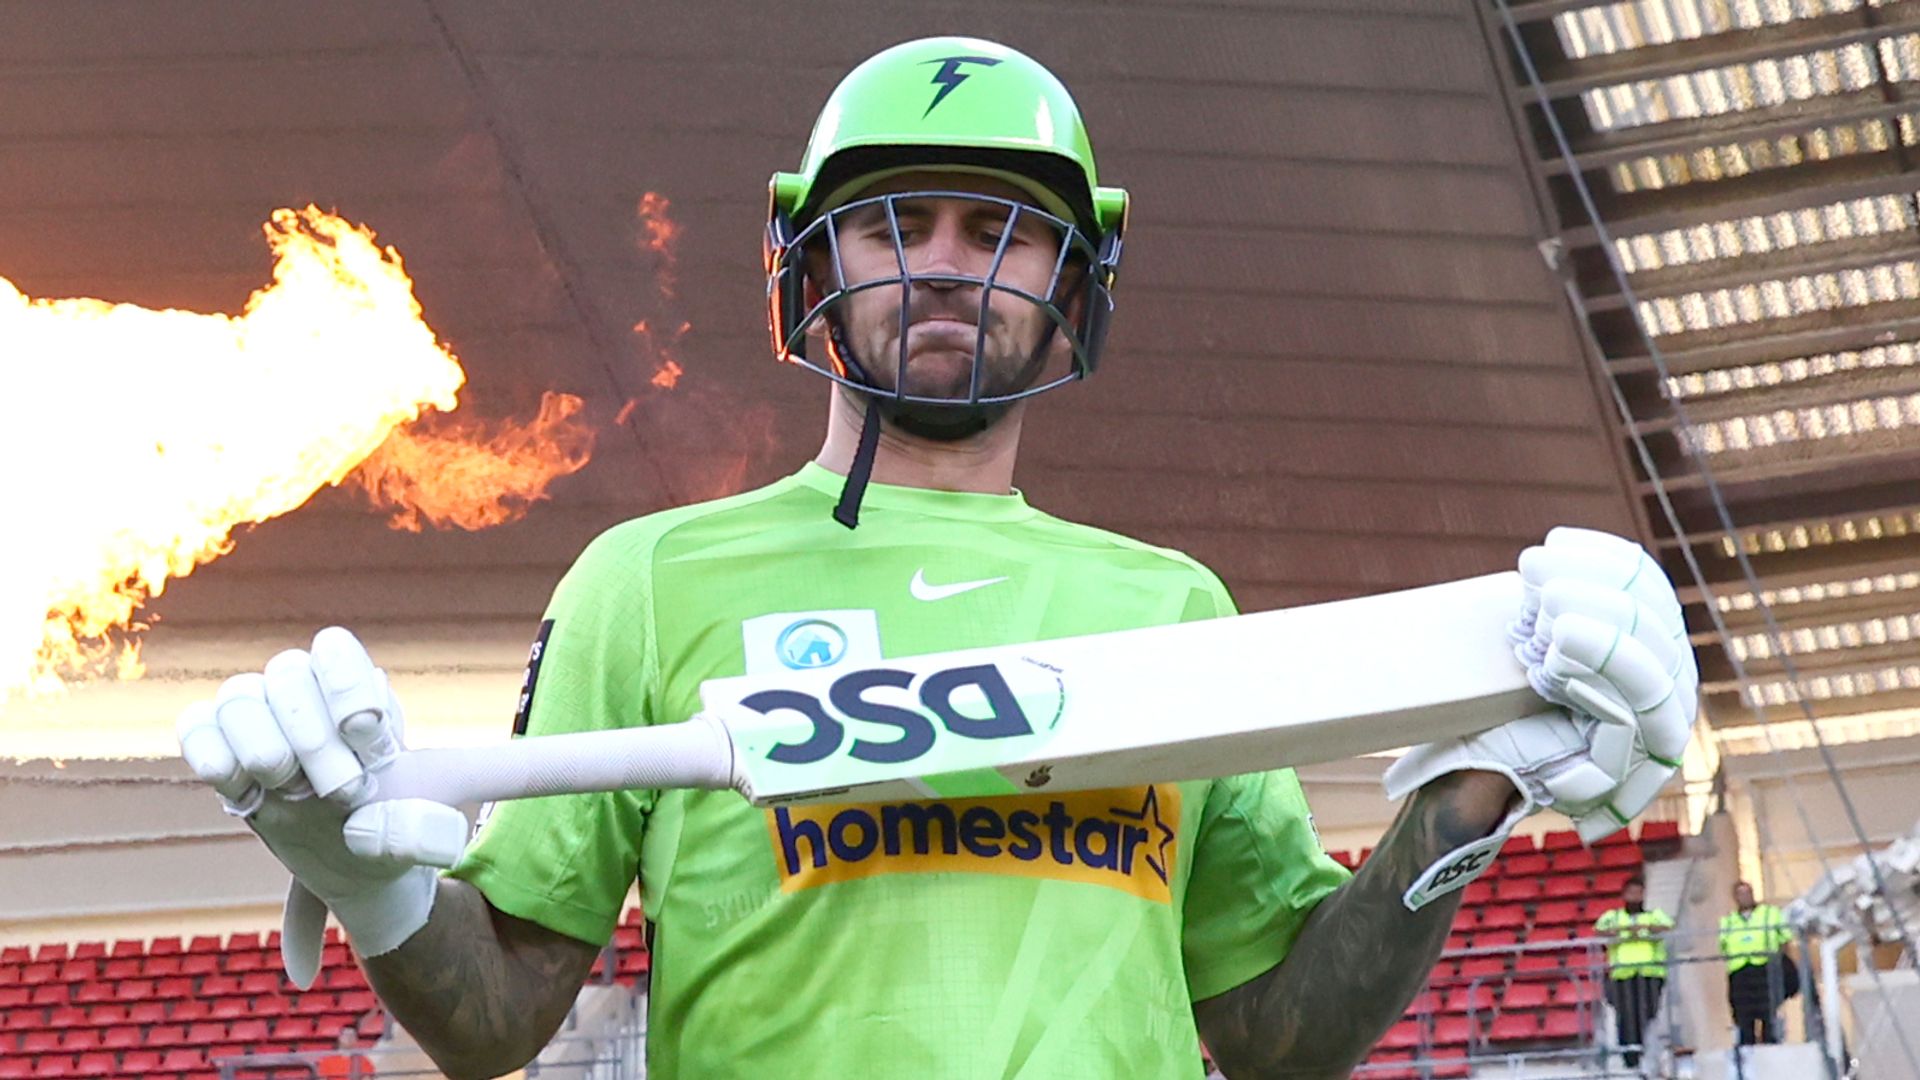 Watch the Big Bash League in full on Sky Sports